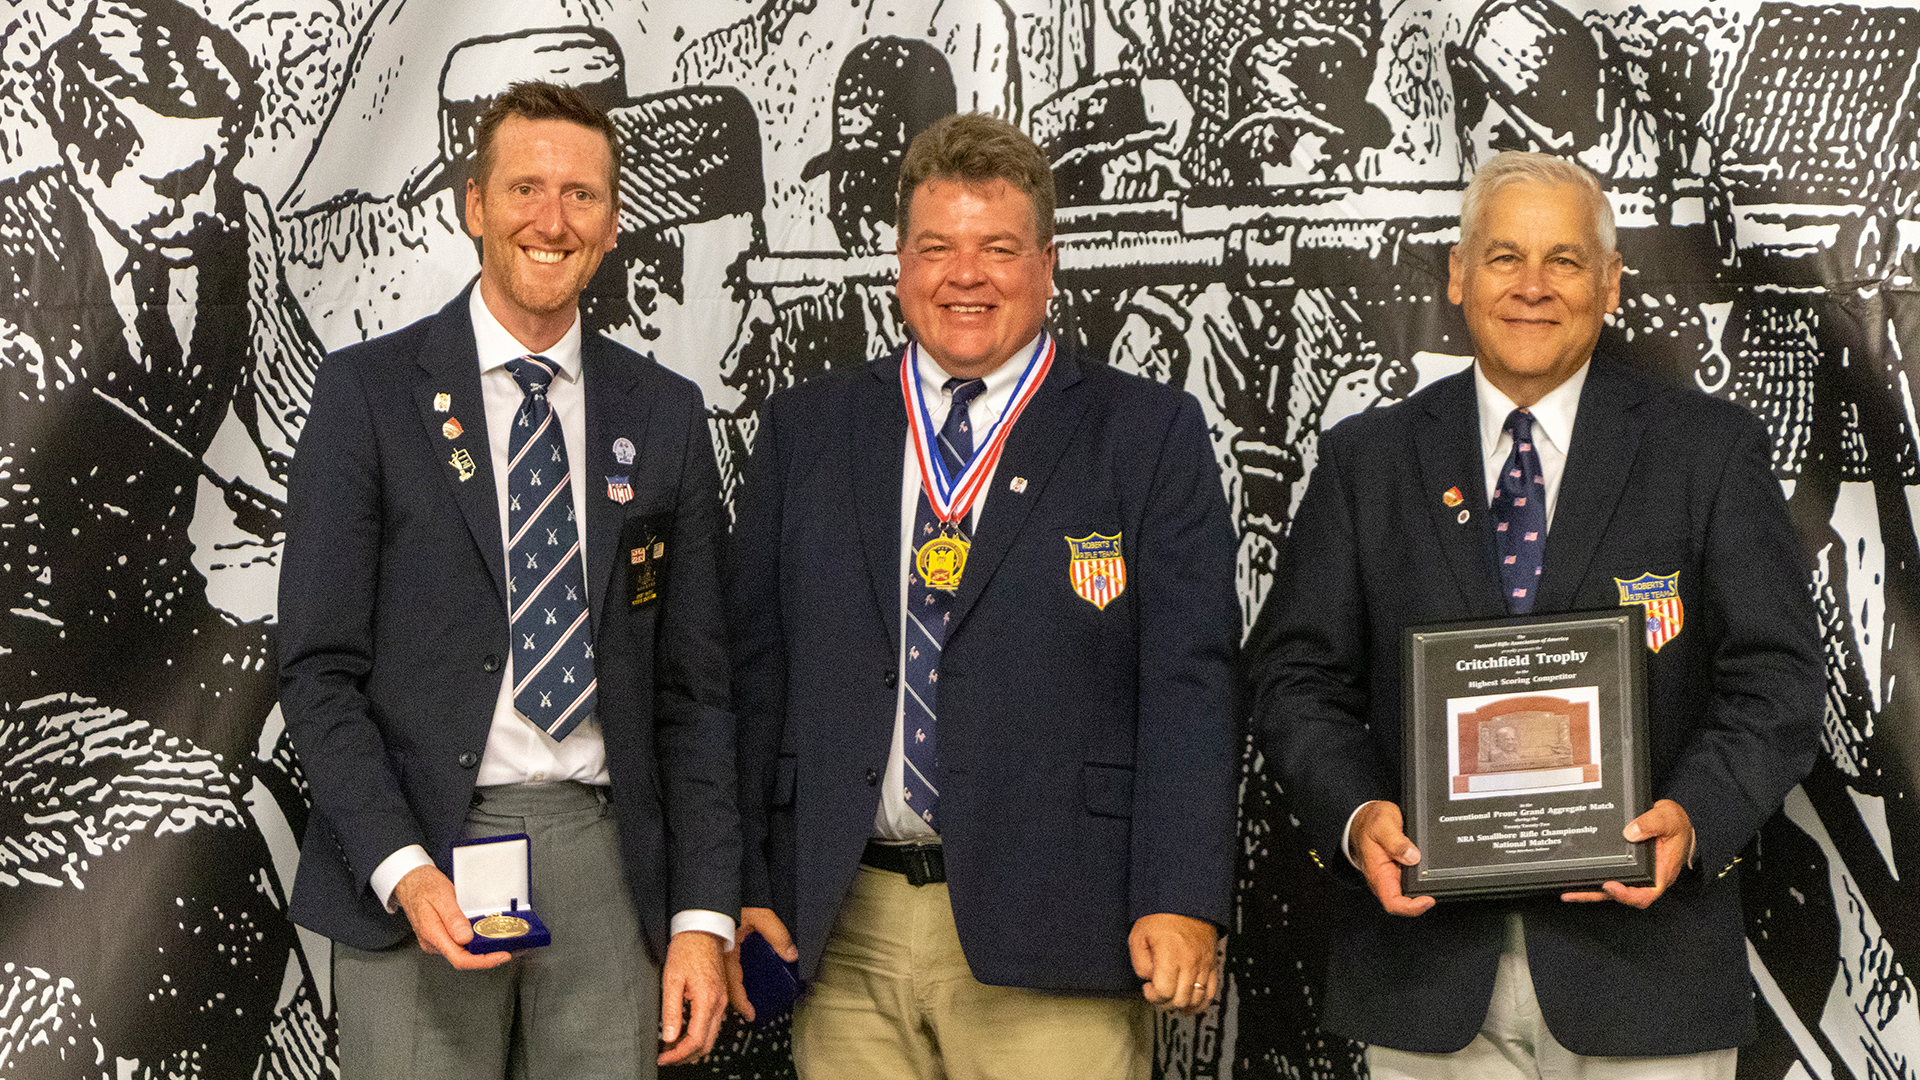 Smallbore competitors with plaques and medals